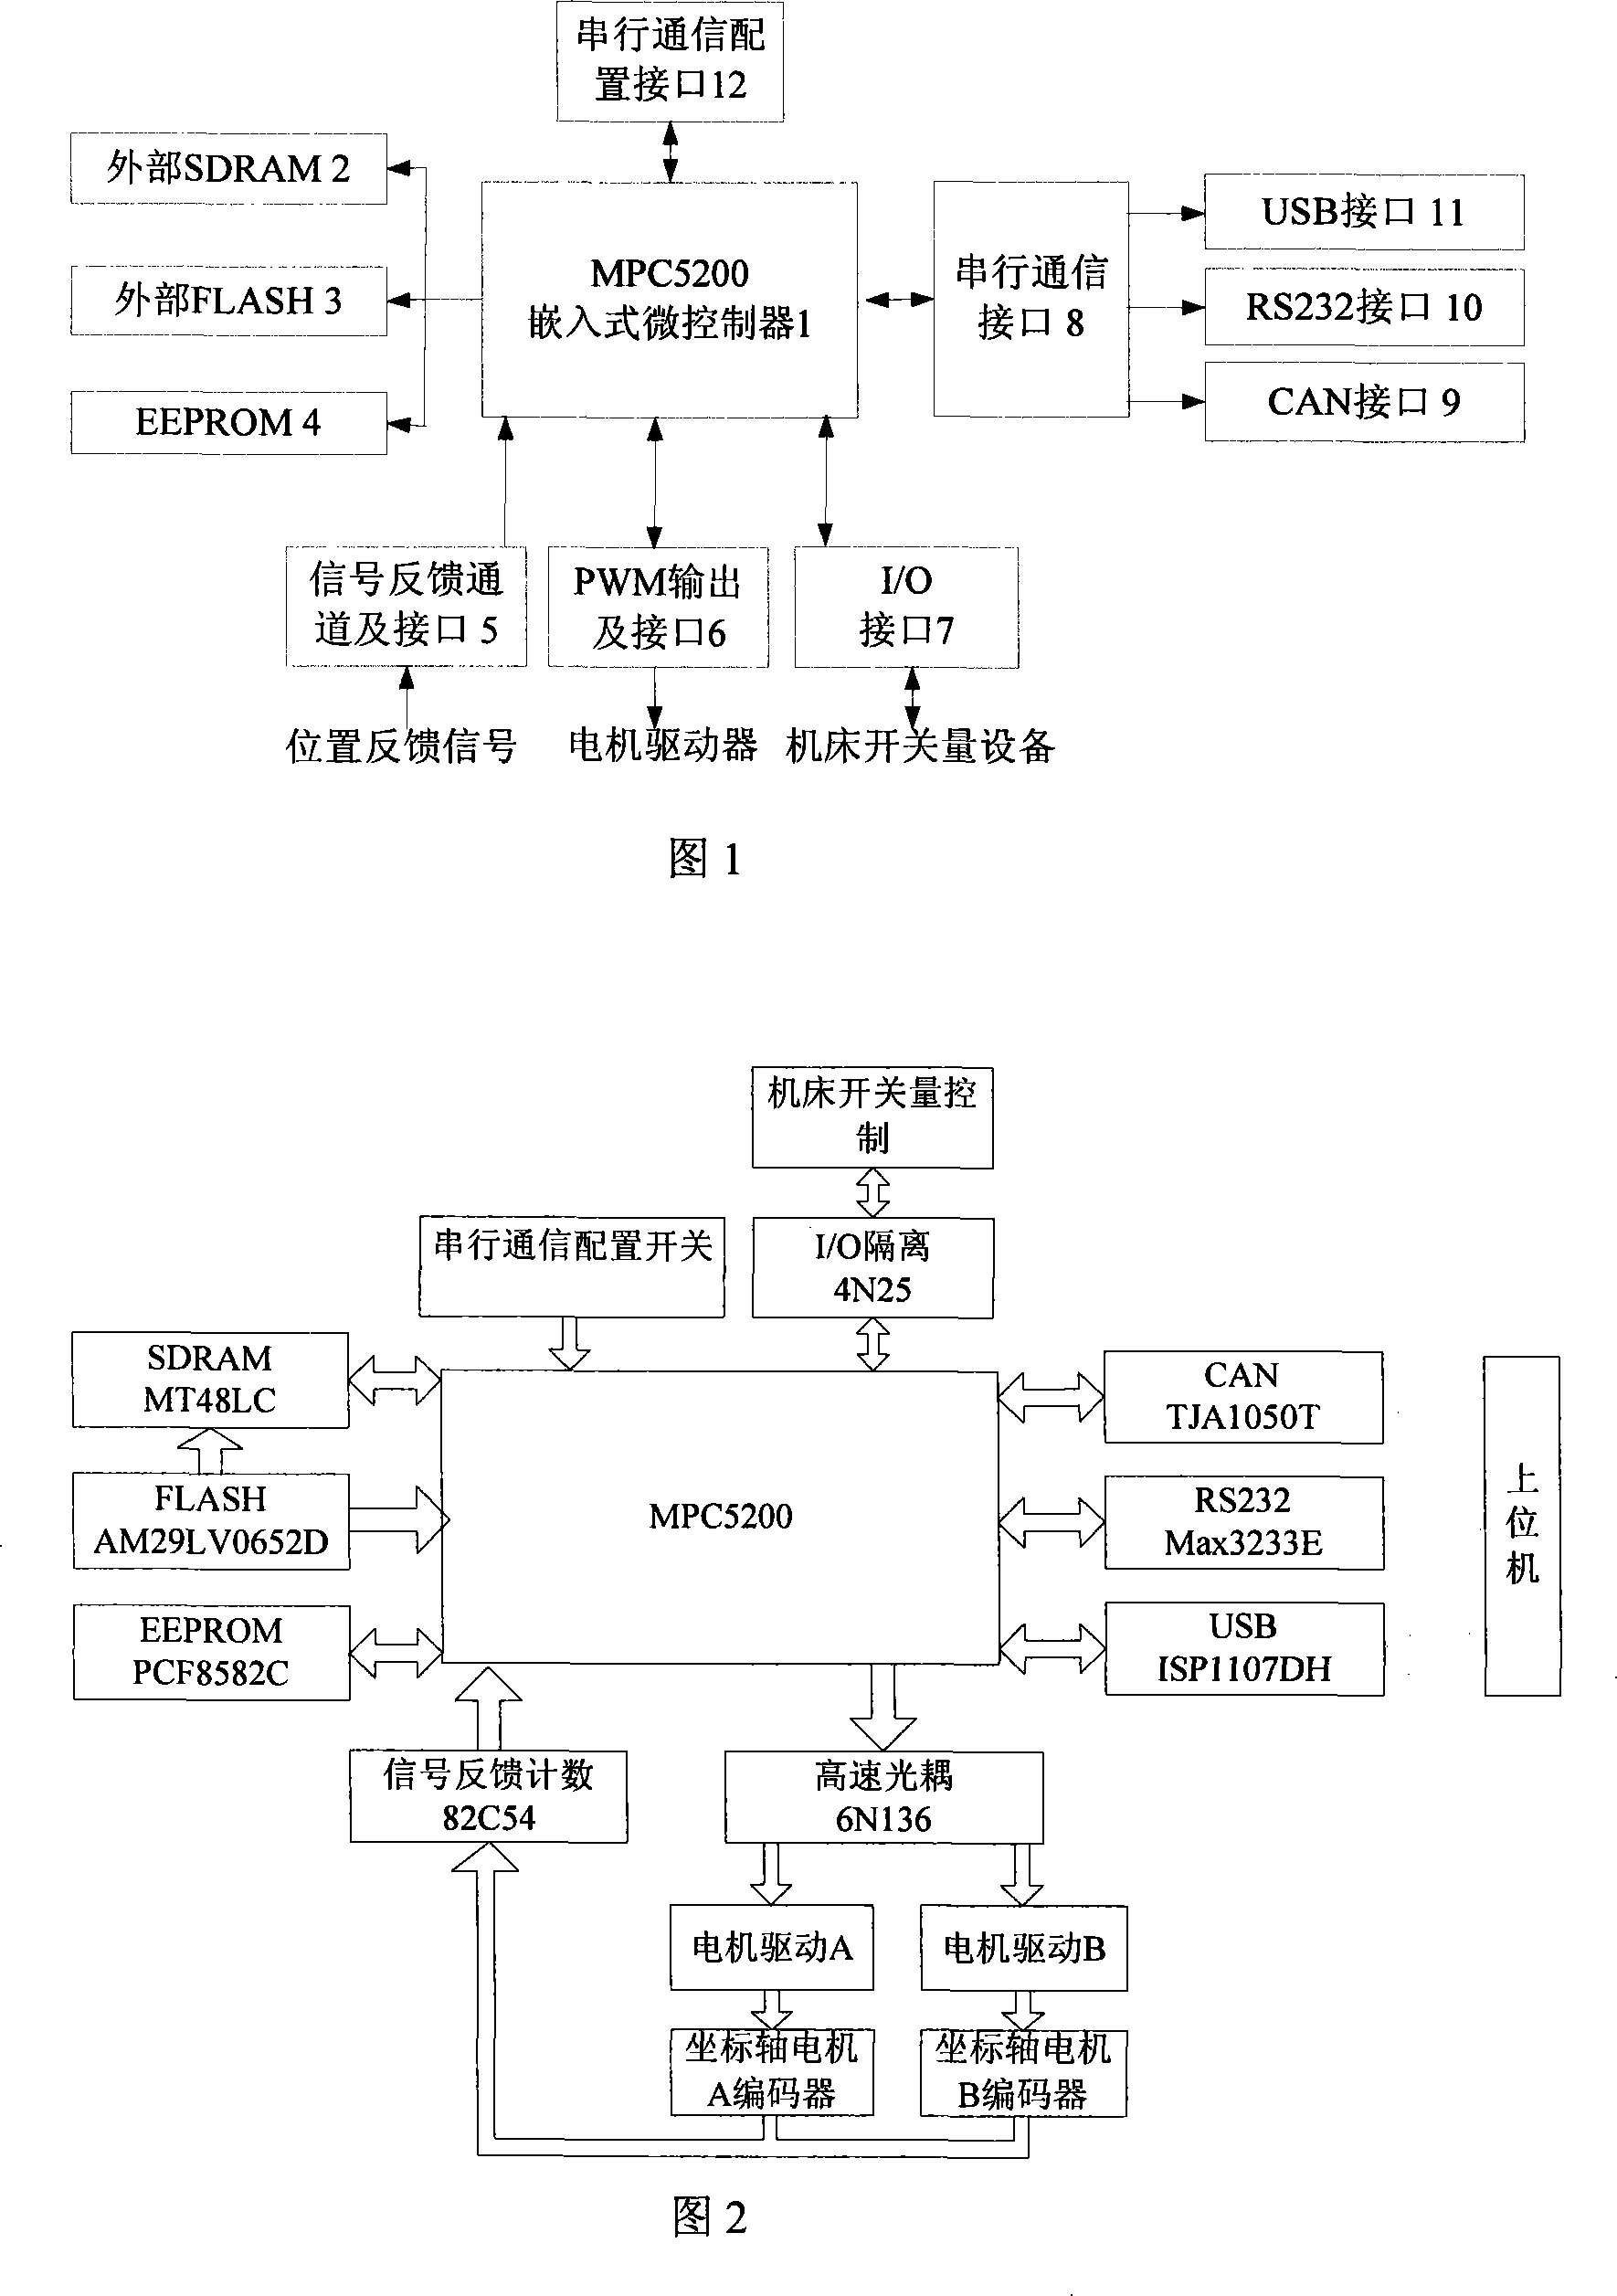 Multiple axle movement controller based on MPC5200 and its operation method